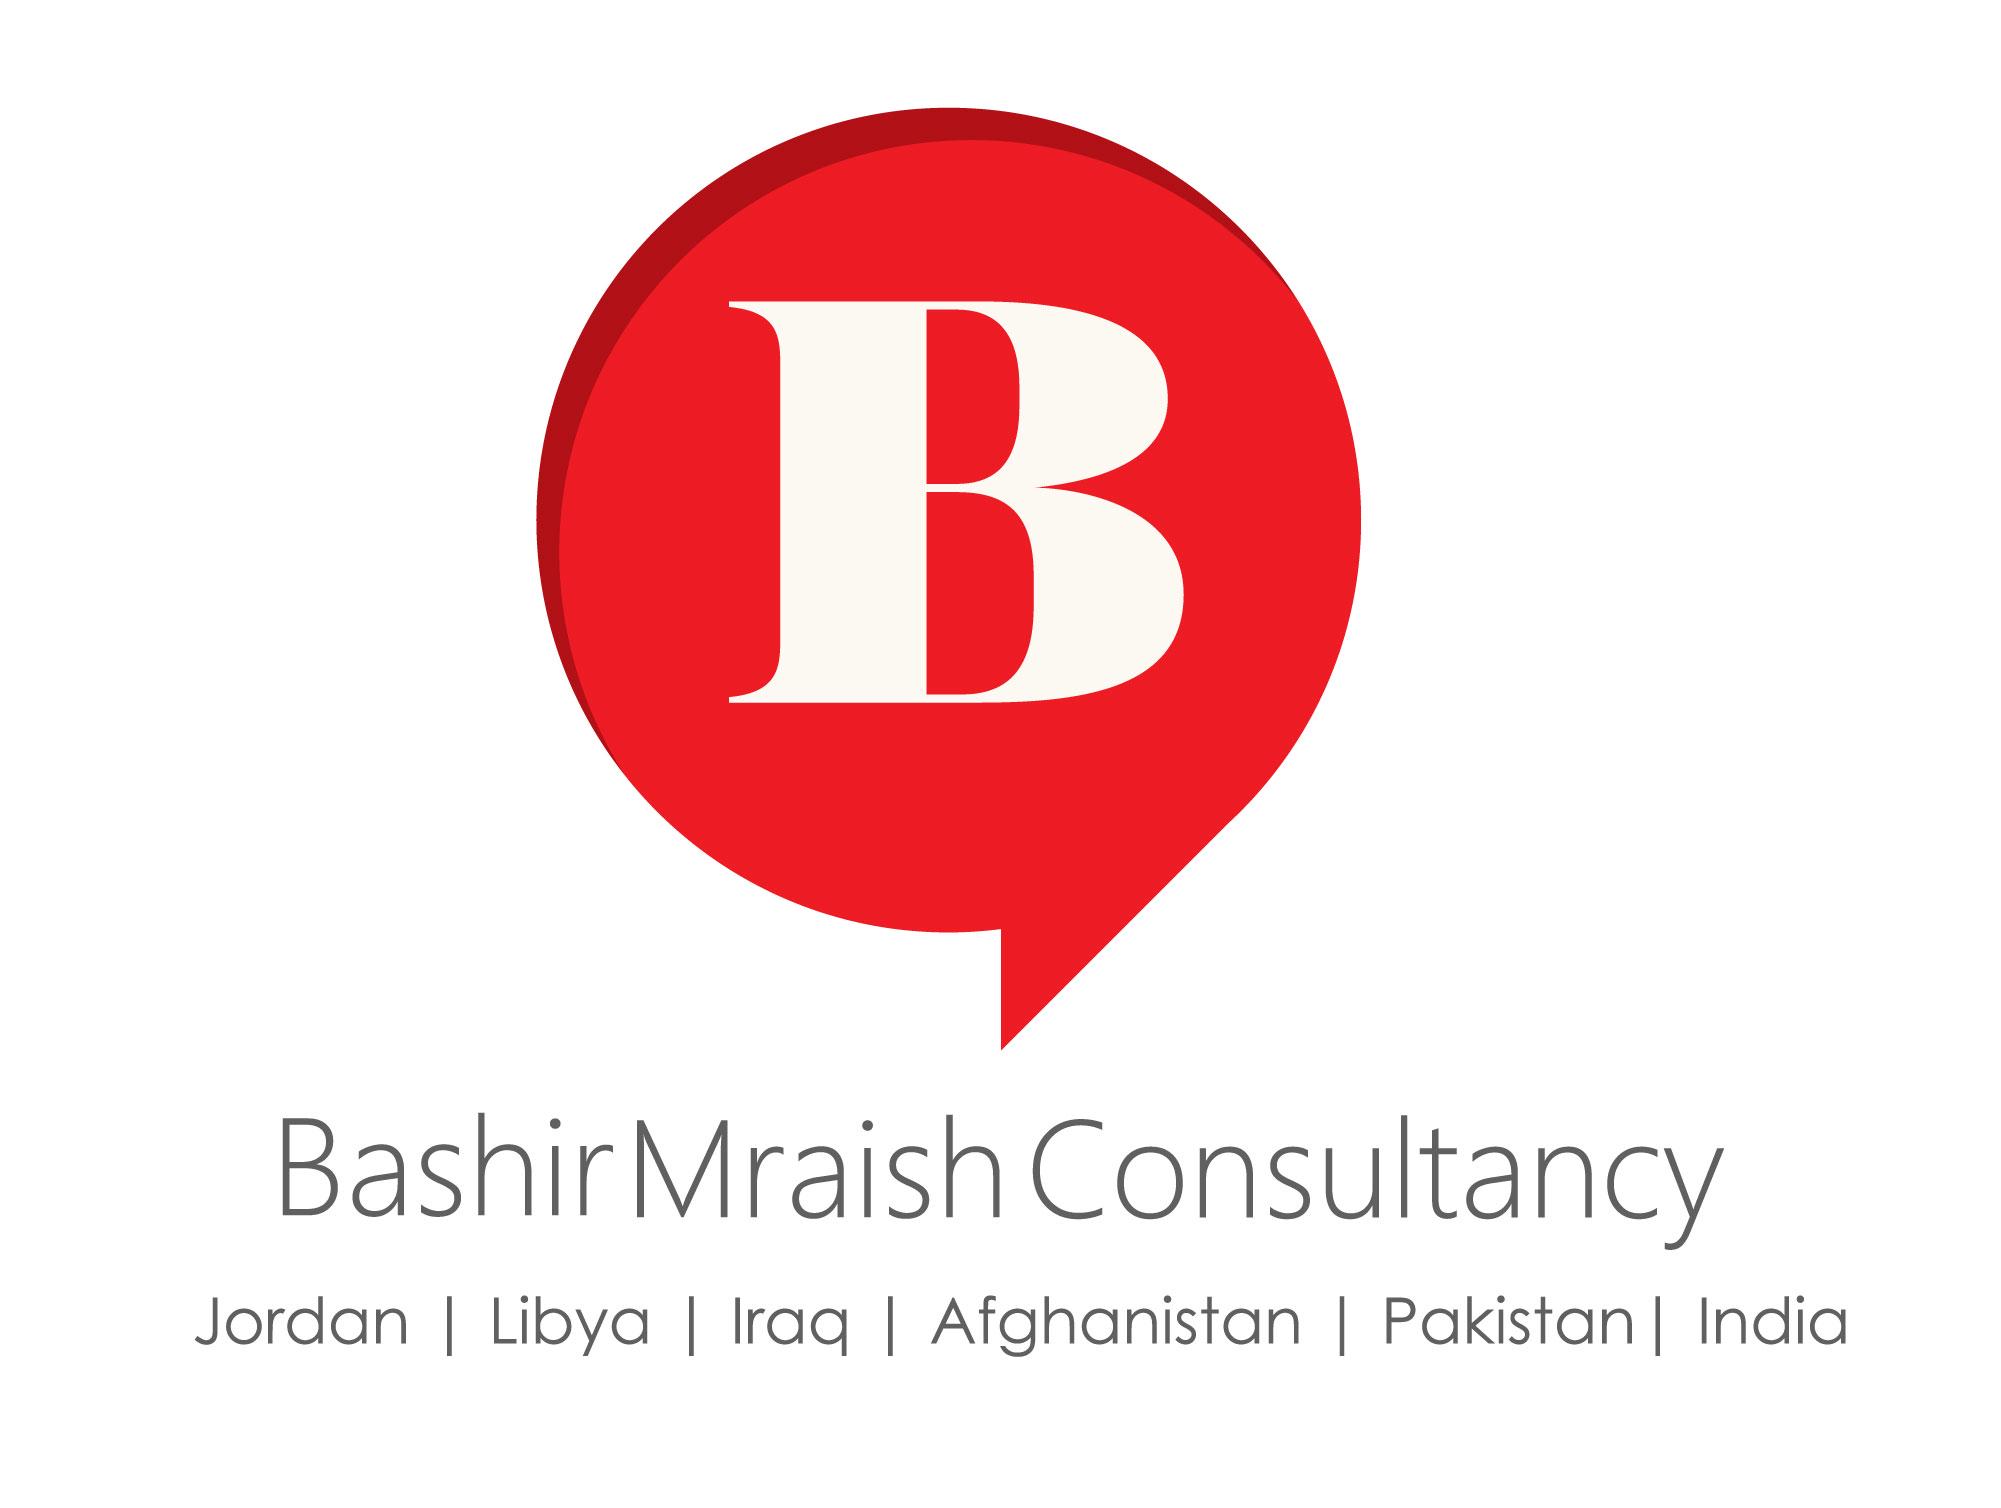 Bashir Mraish Consultancy profile on Qualified.One